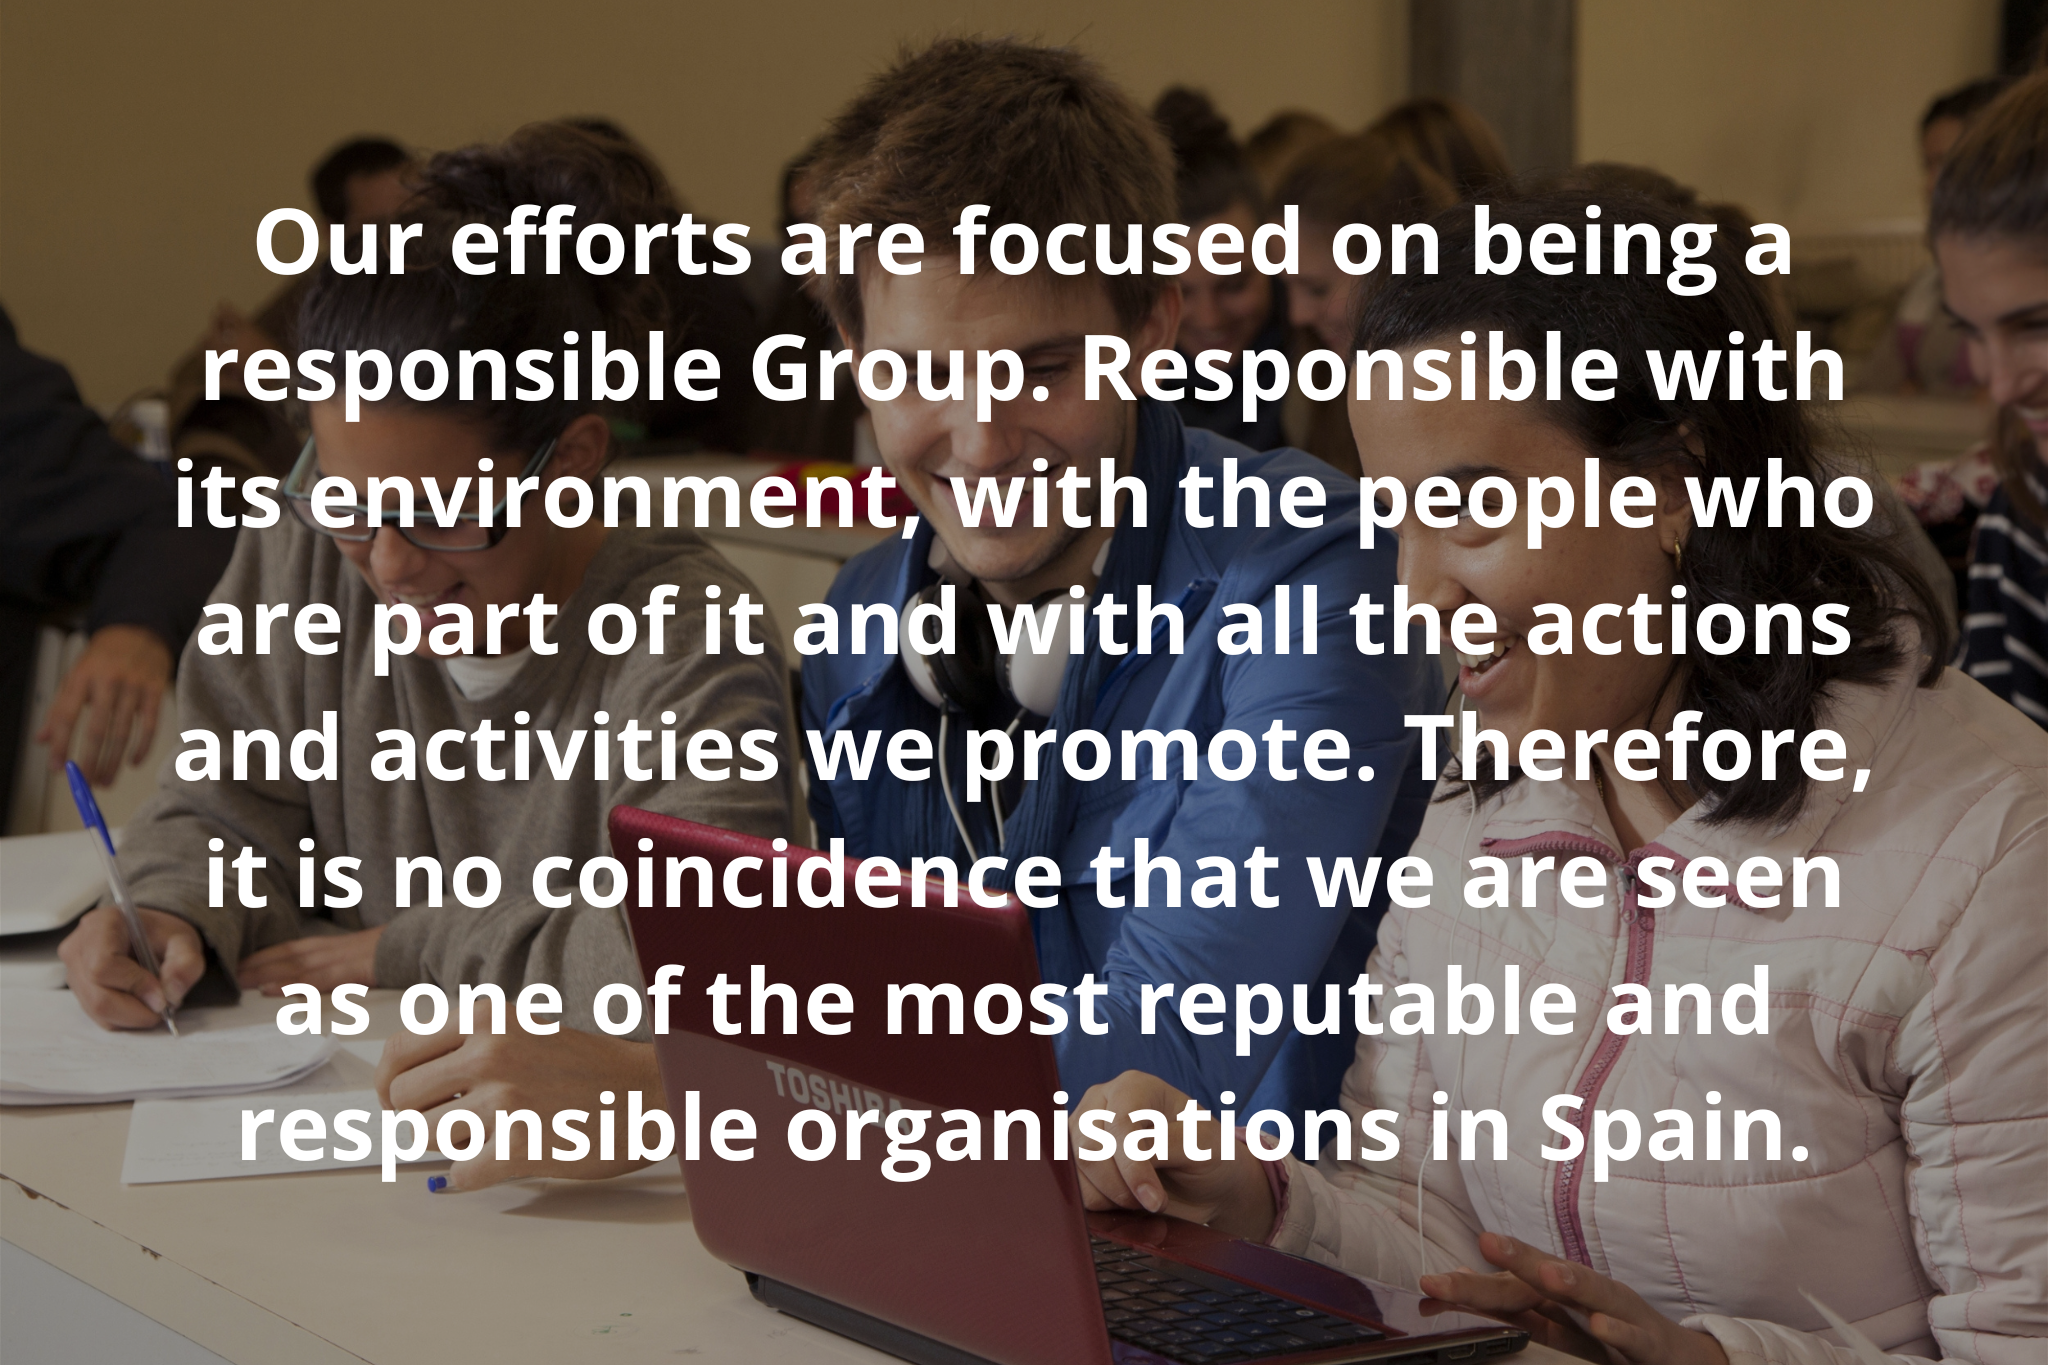 Our efforts are focused on being a responsible Group. Responsible with its environment, with the people who are part of it and with all the actions and activities we promote. Therefore, it is no coincidence that we are seen as one of the most reputable and responsible organisations in Spain.